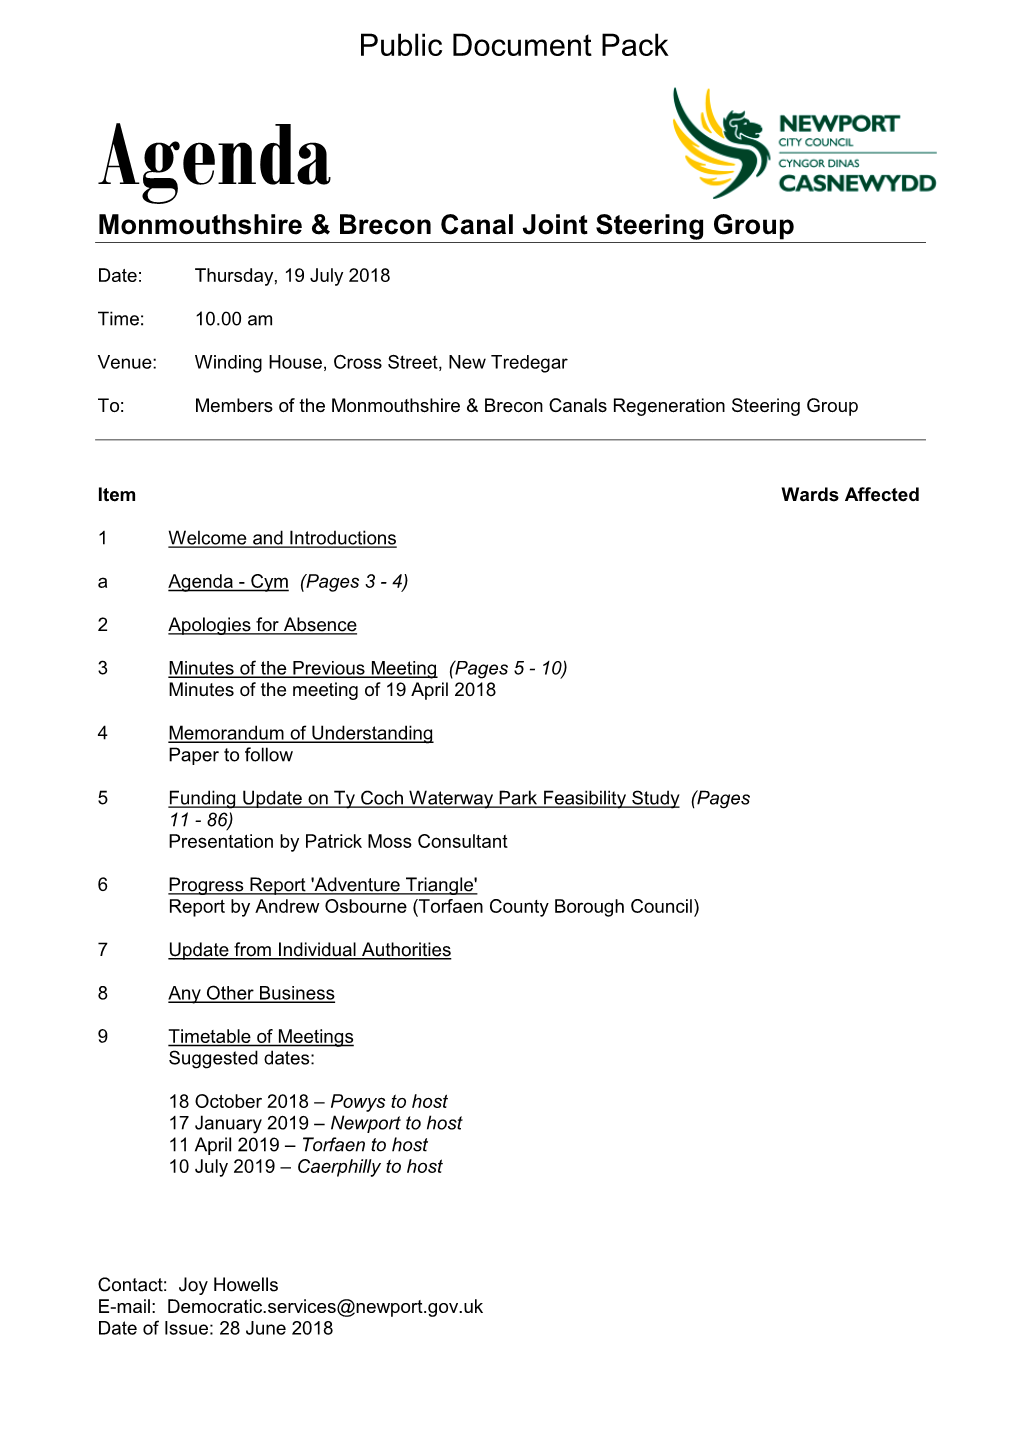 (Public Pack)Agenda Document for Monmouthshire & Brecon Canal Joint Steering Group, 19/07/2018 10:00